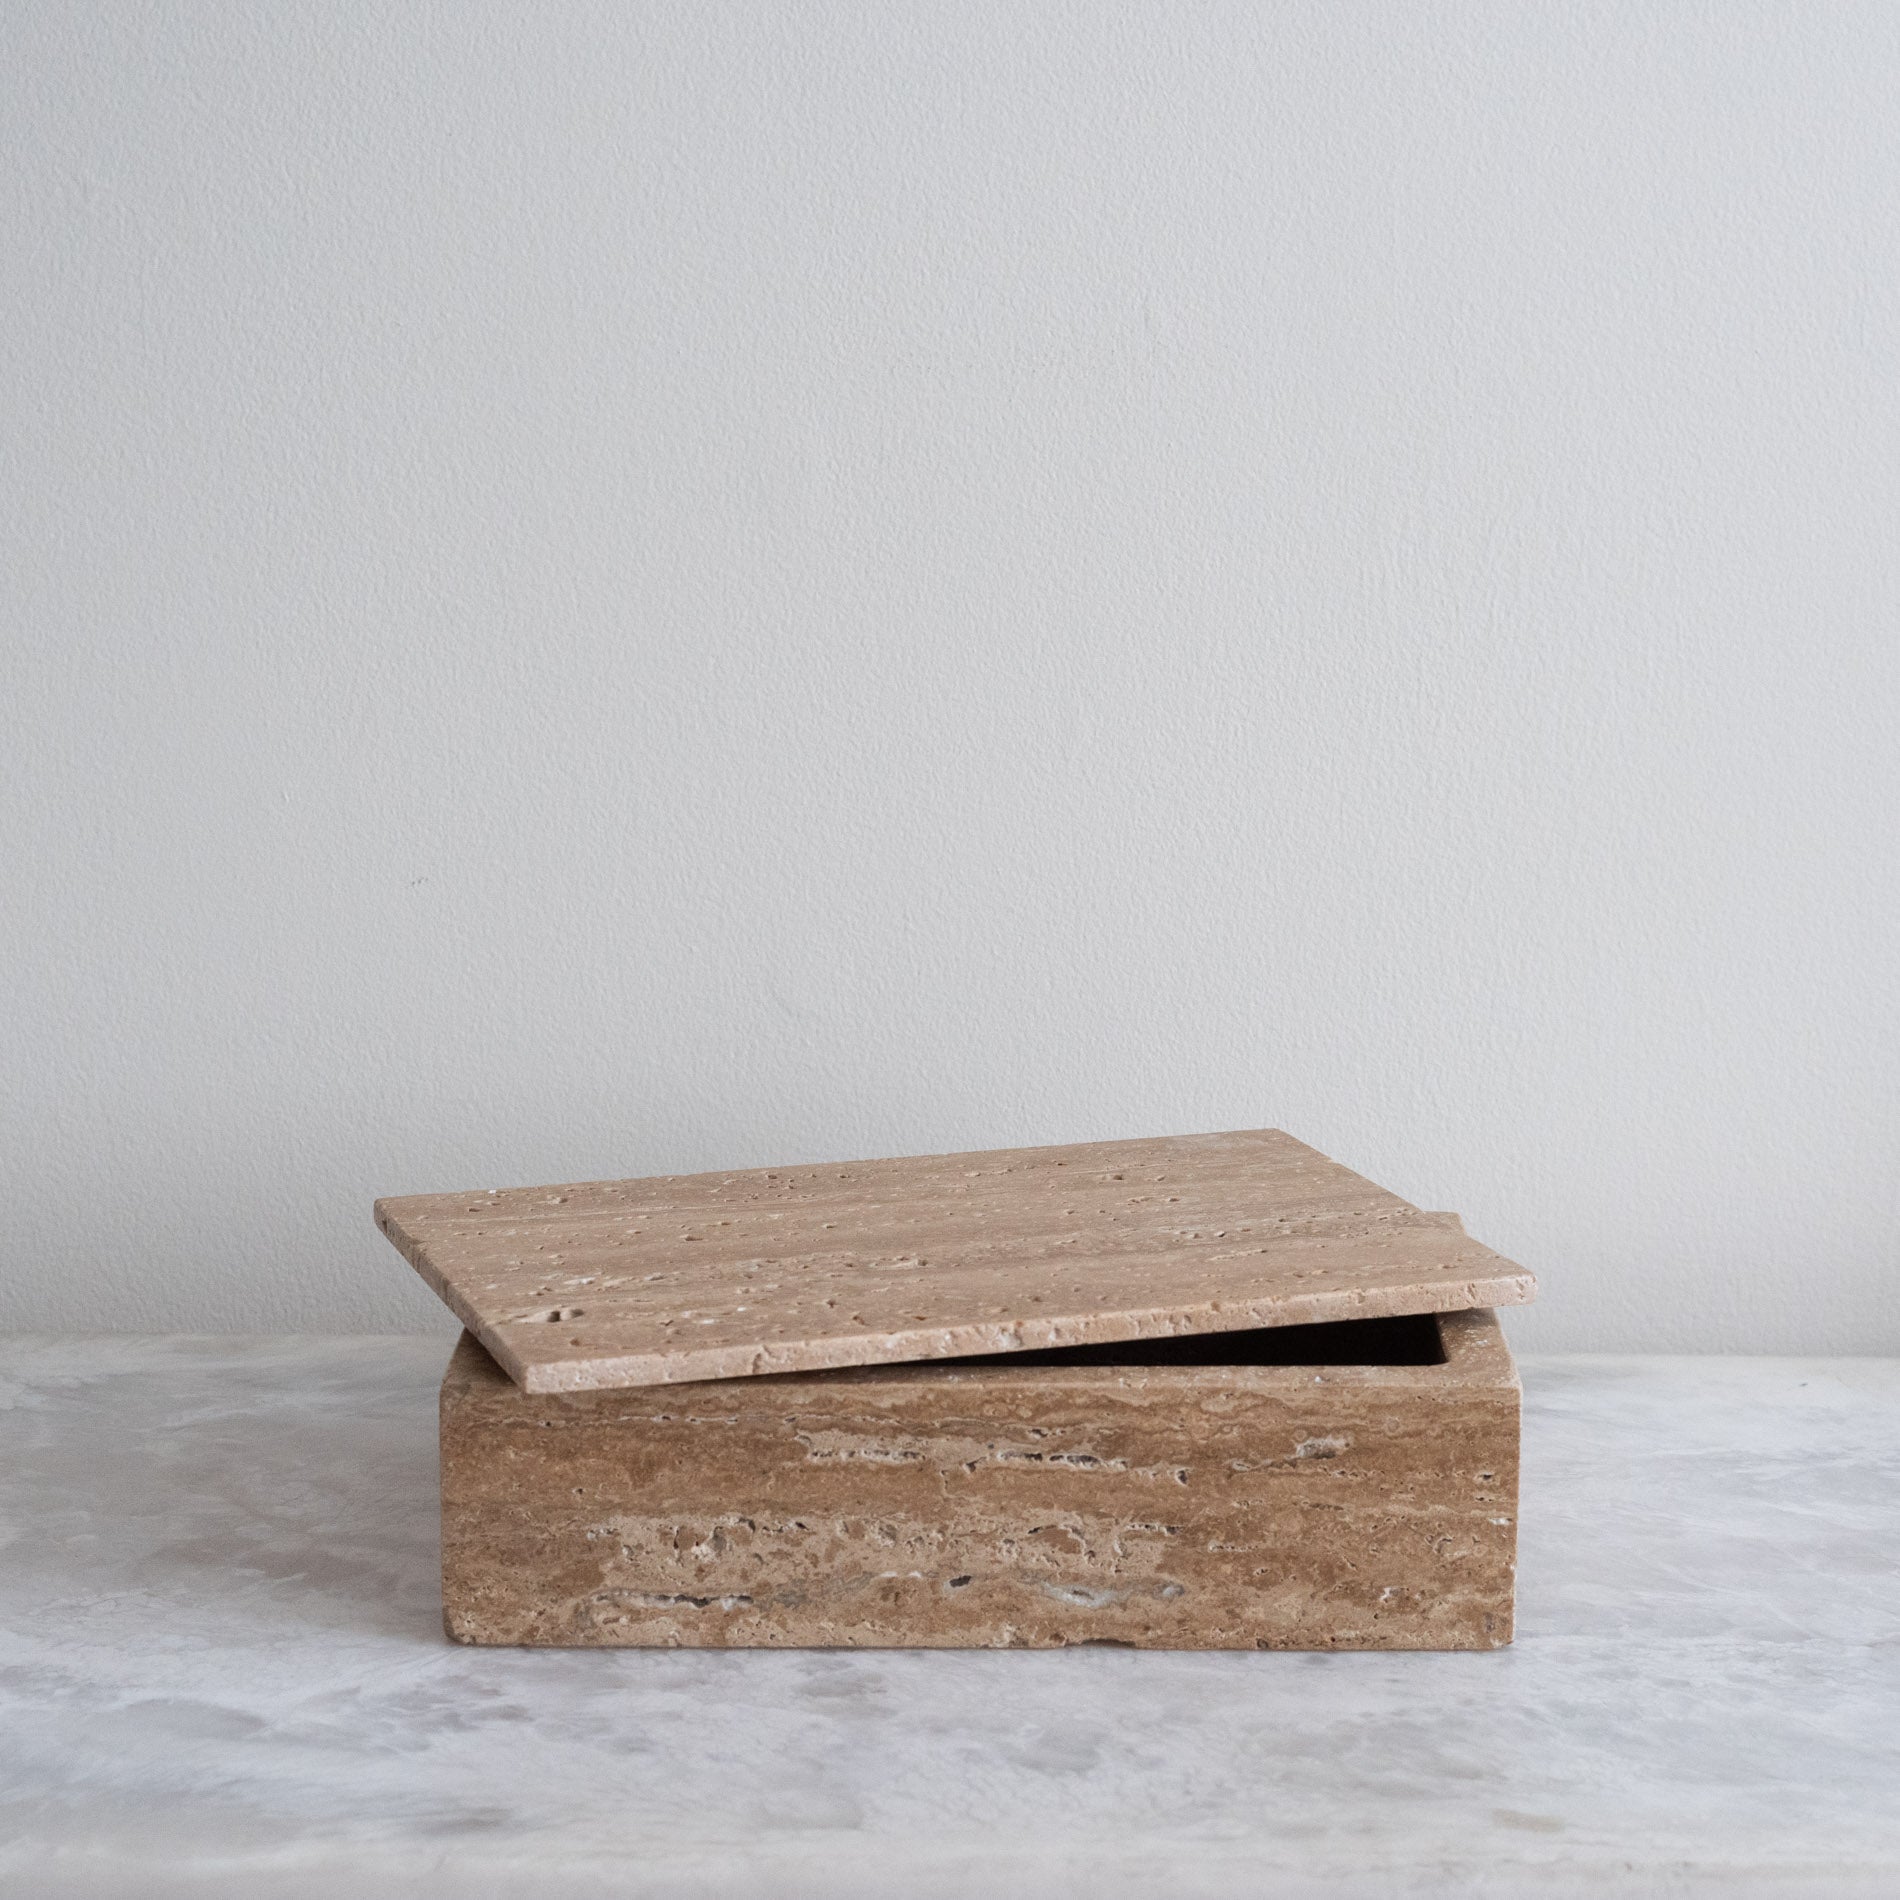 Big Box in Travertine – Anyon Design and Atelier